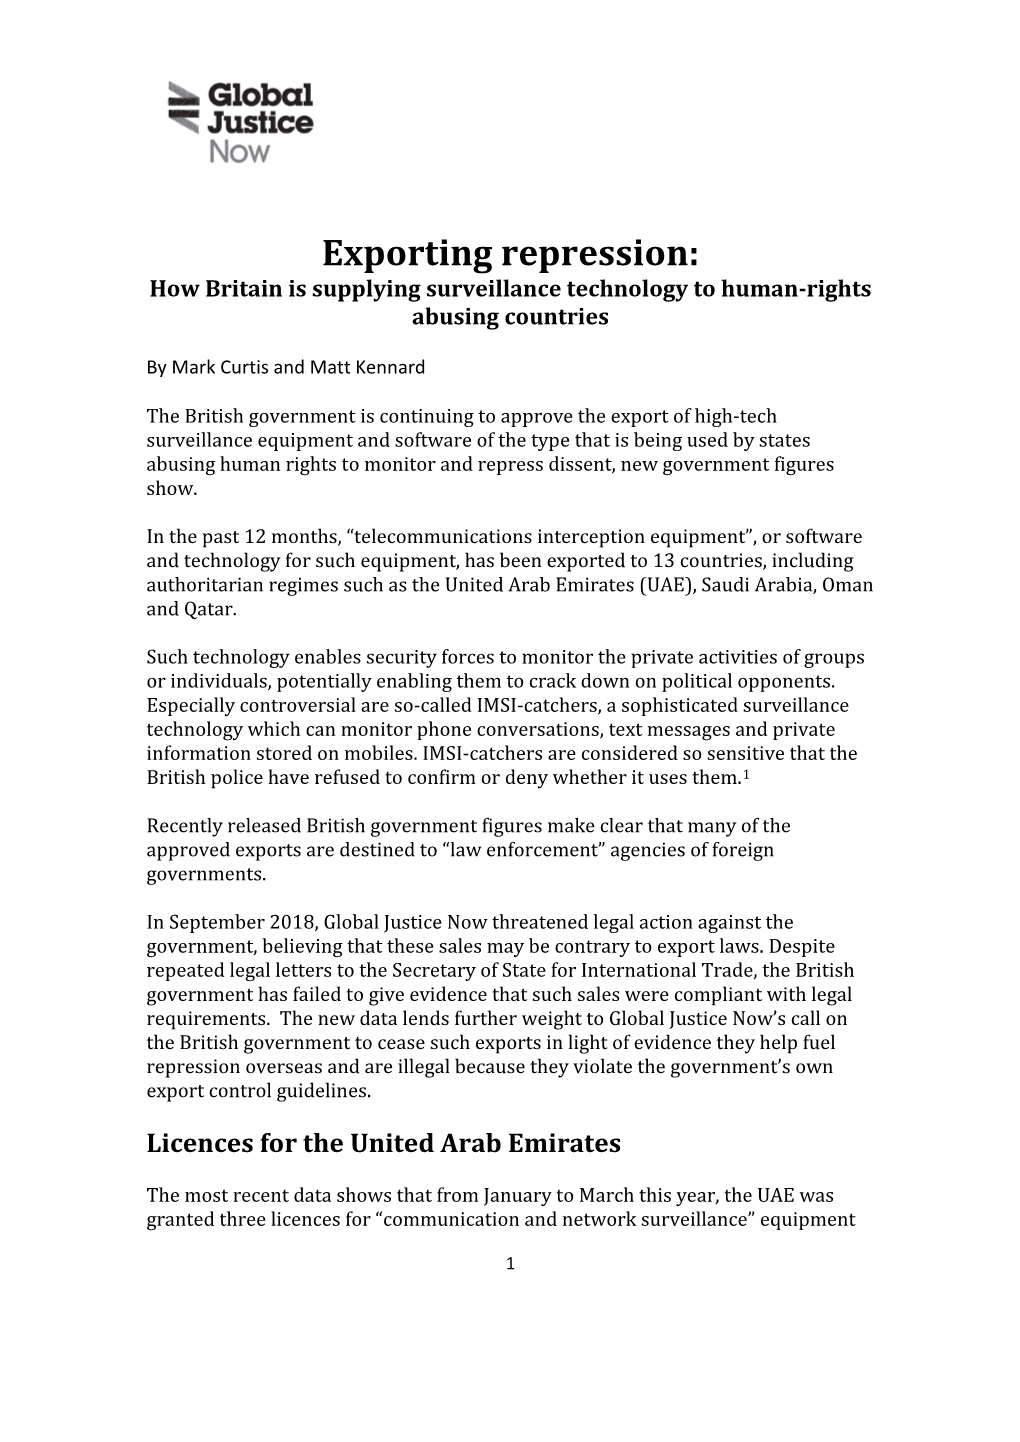 Exporting Repression: How Britain Is Supplying Surveillance Technology to Human-Rights Abusing Countries